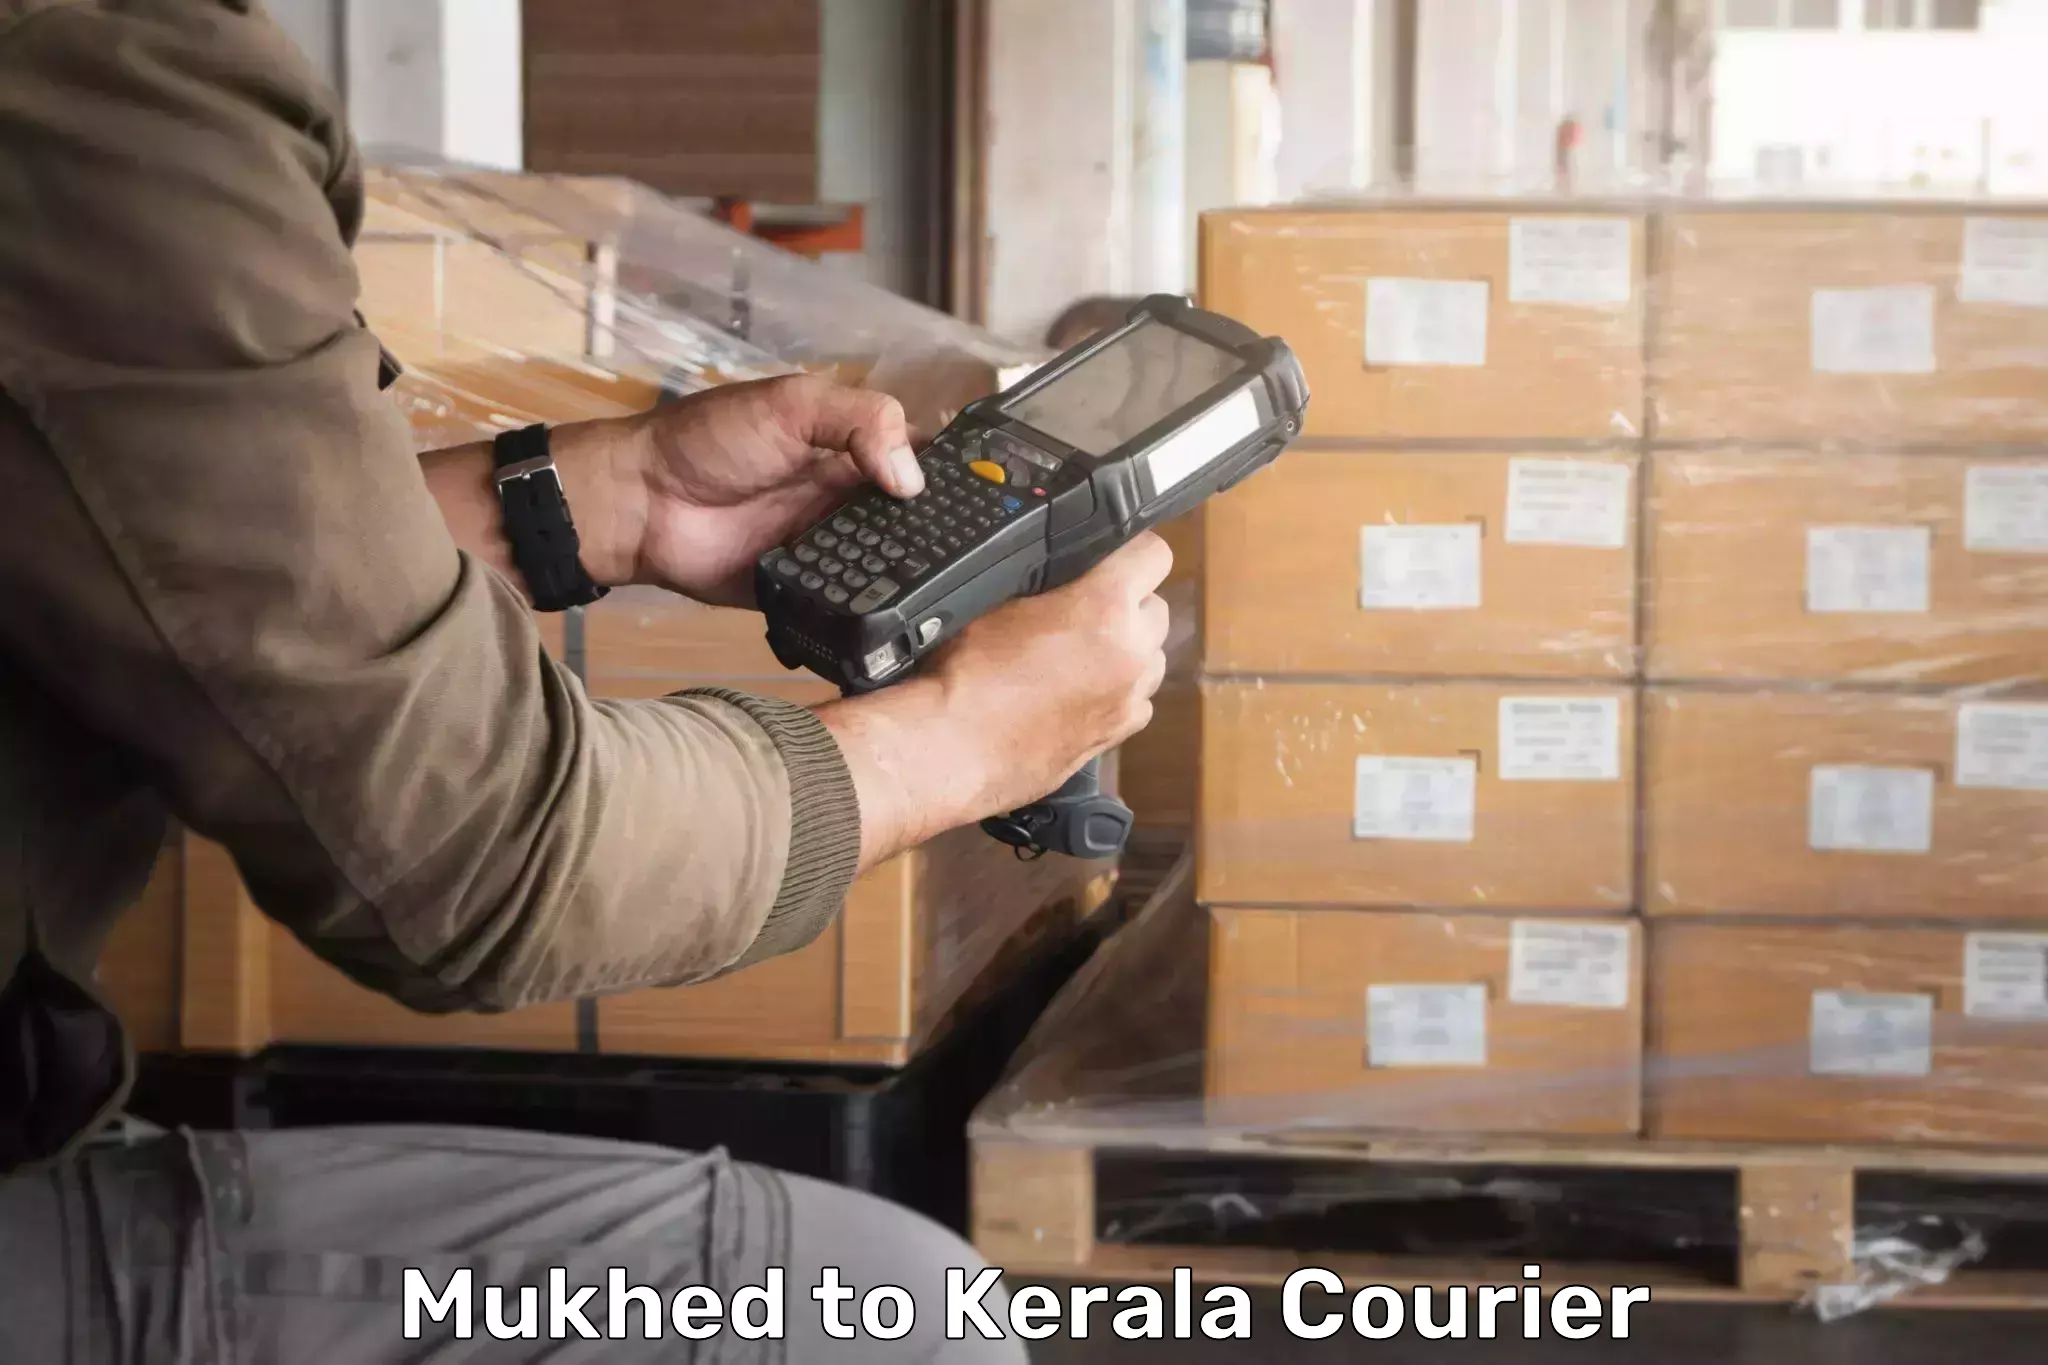 24-hour delivery options Mukhed to Kottayam